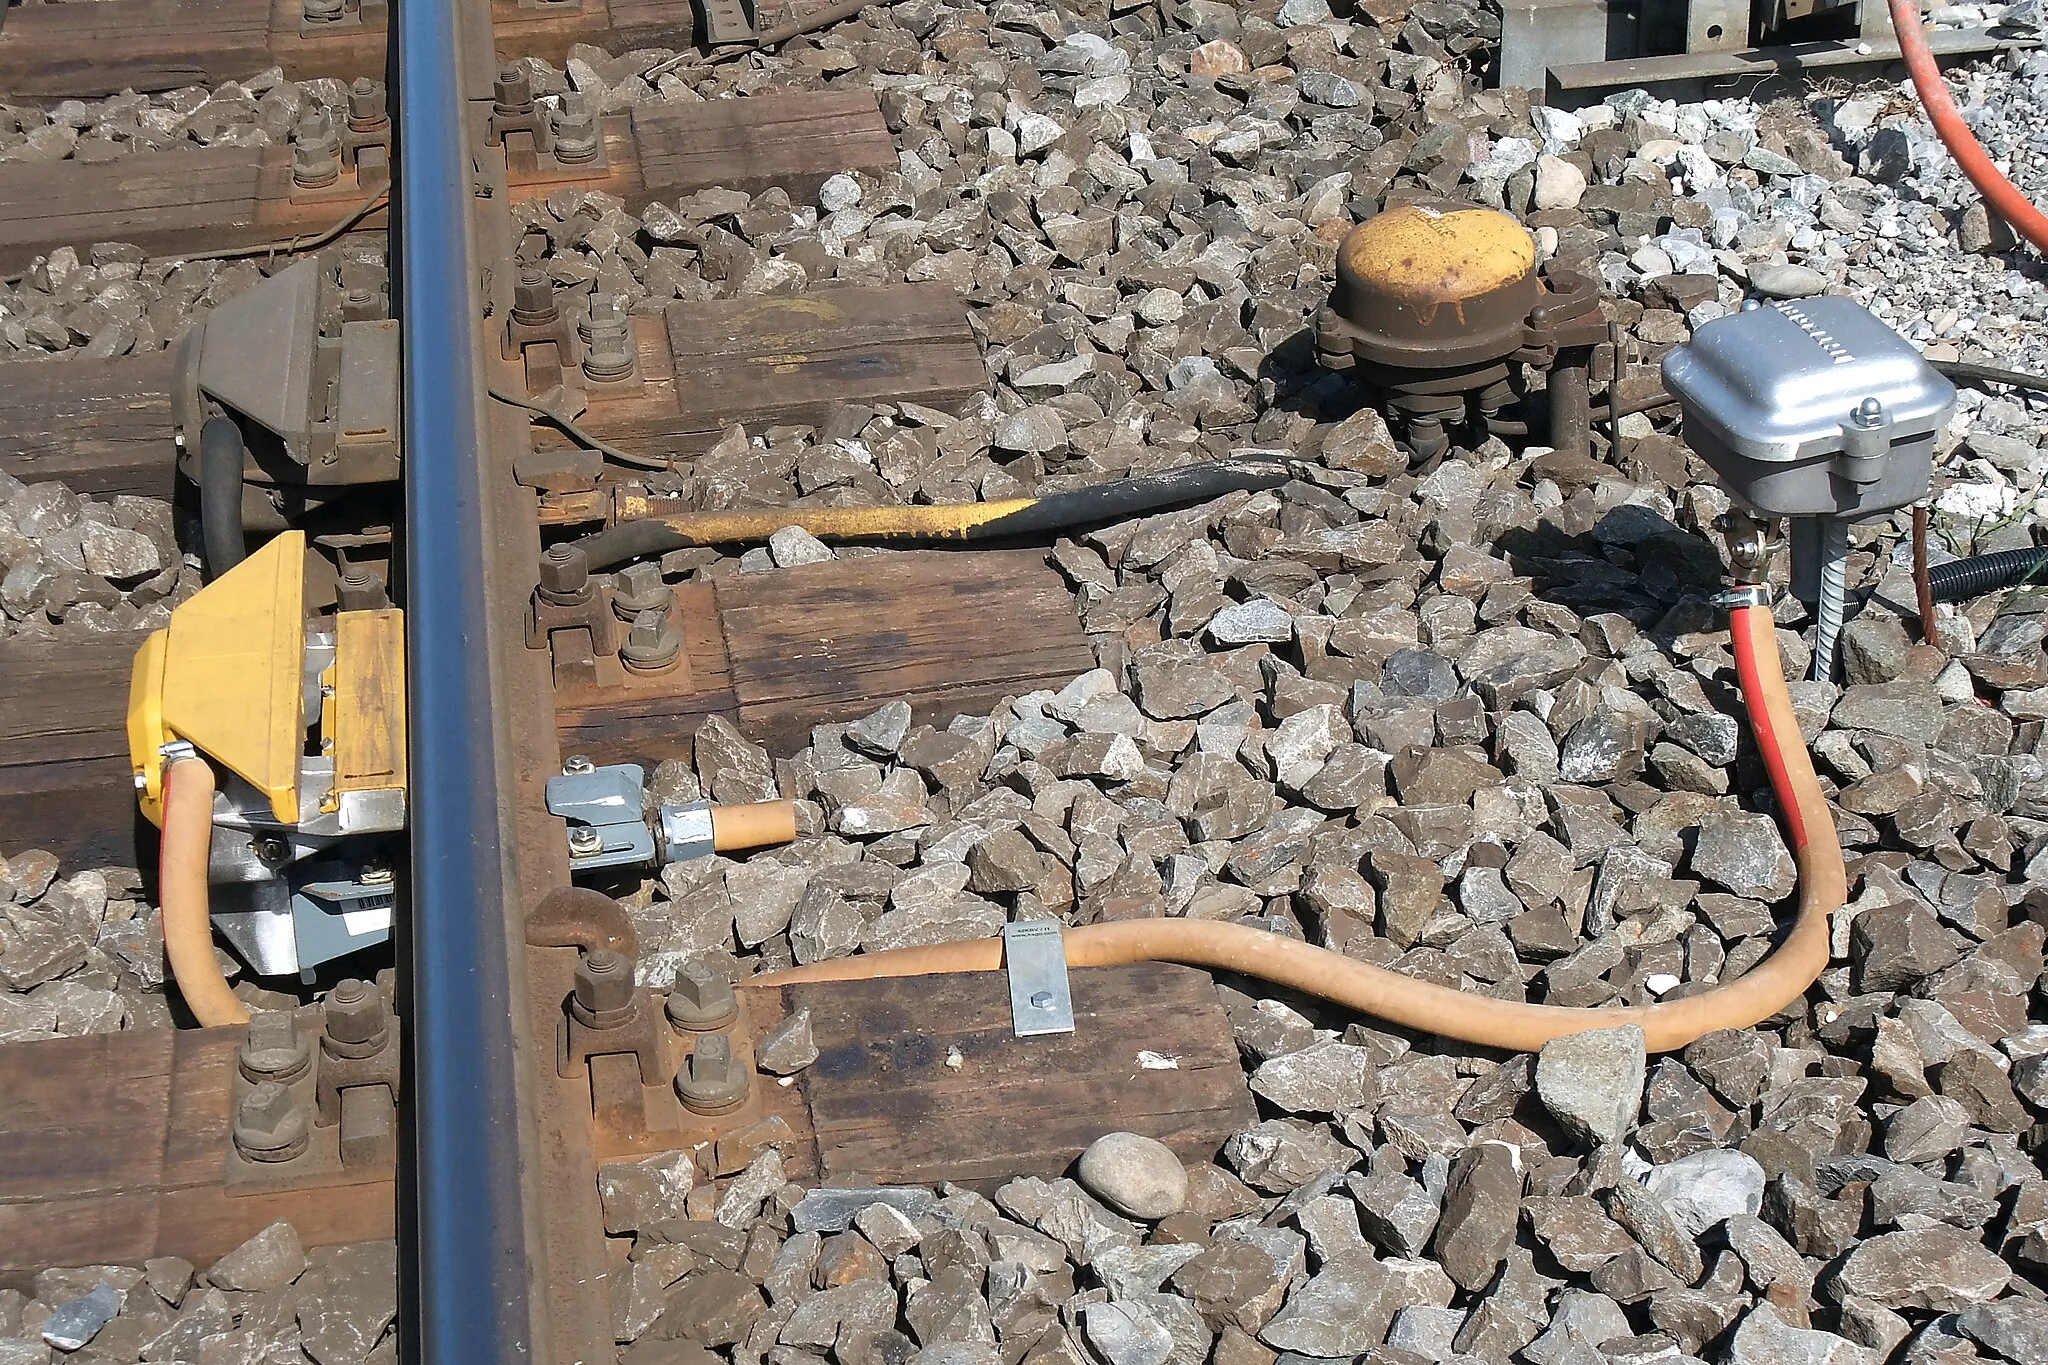 Photo showing: Upgrading of the train protection systems on the tracks of the Swiss Federal Railways. This facility is part of the level crossing safety system. In the transitional phase, the old and new facilities are still side by side in operation. Staad, Switzerland, May 11, 2011.